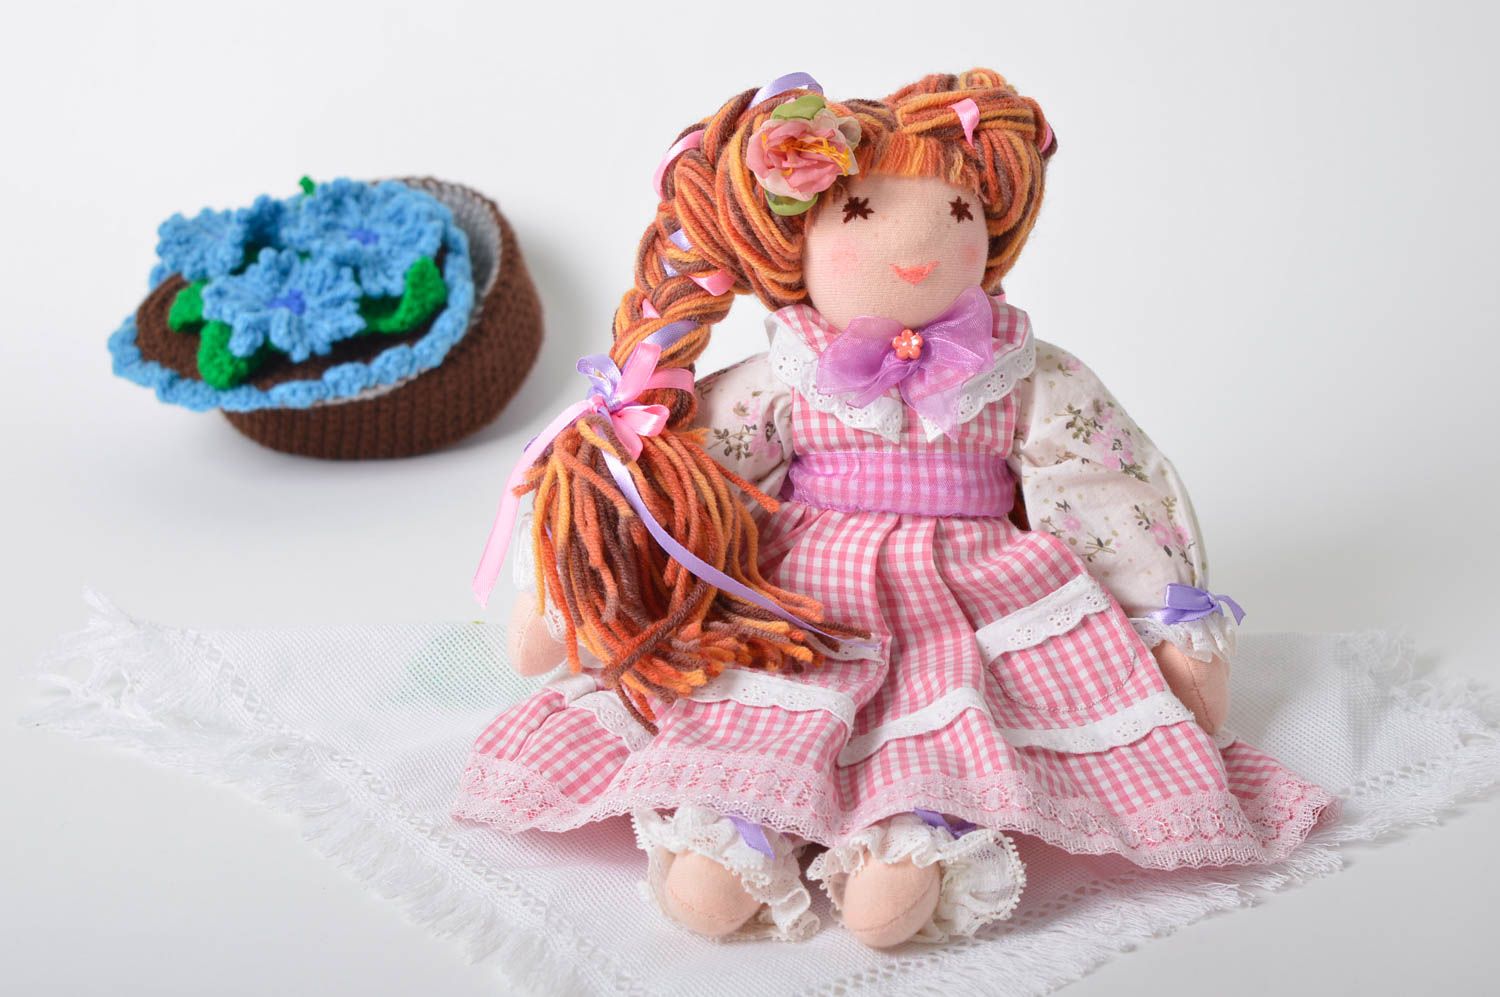 Handmade soft toy girl doll nursery decor kids gifts for decorative use only photo 1